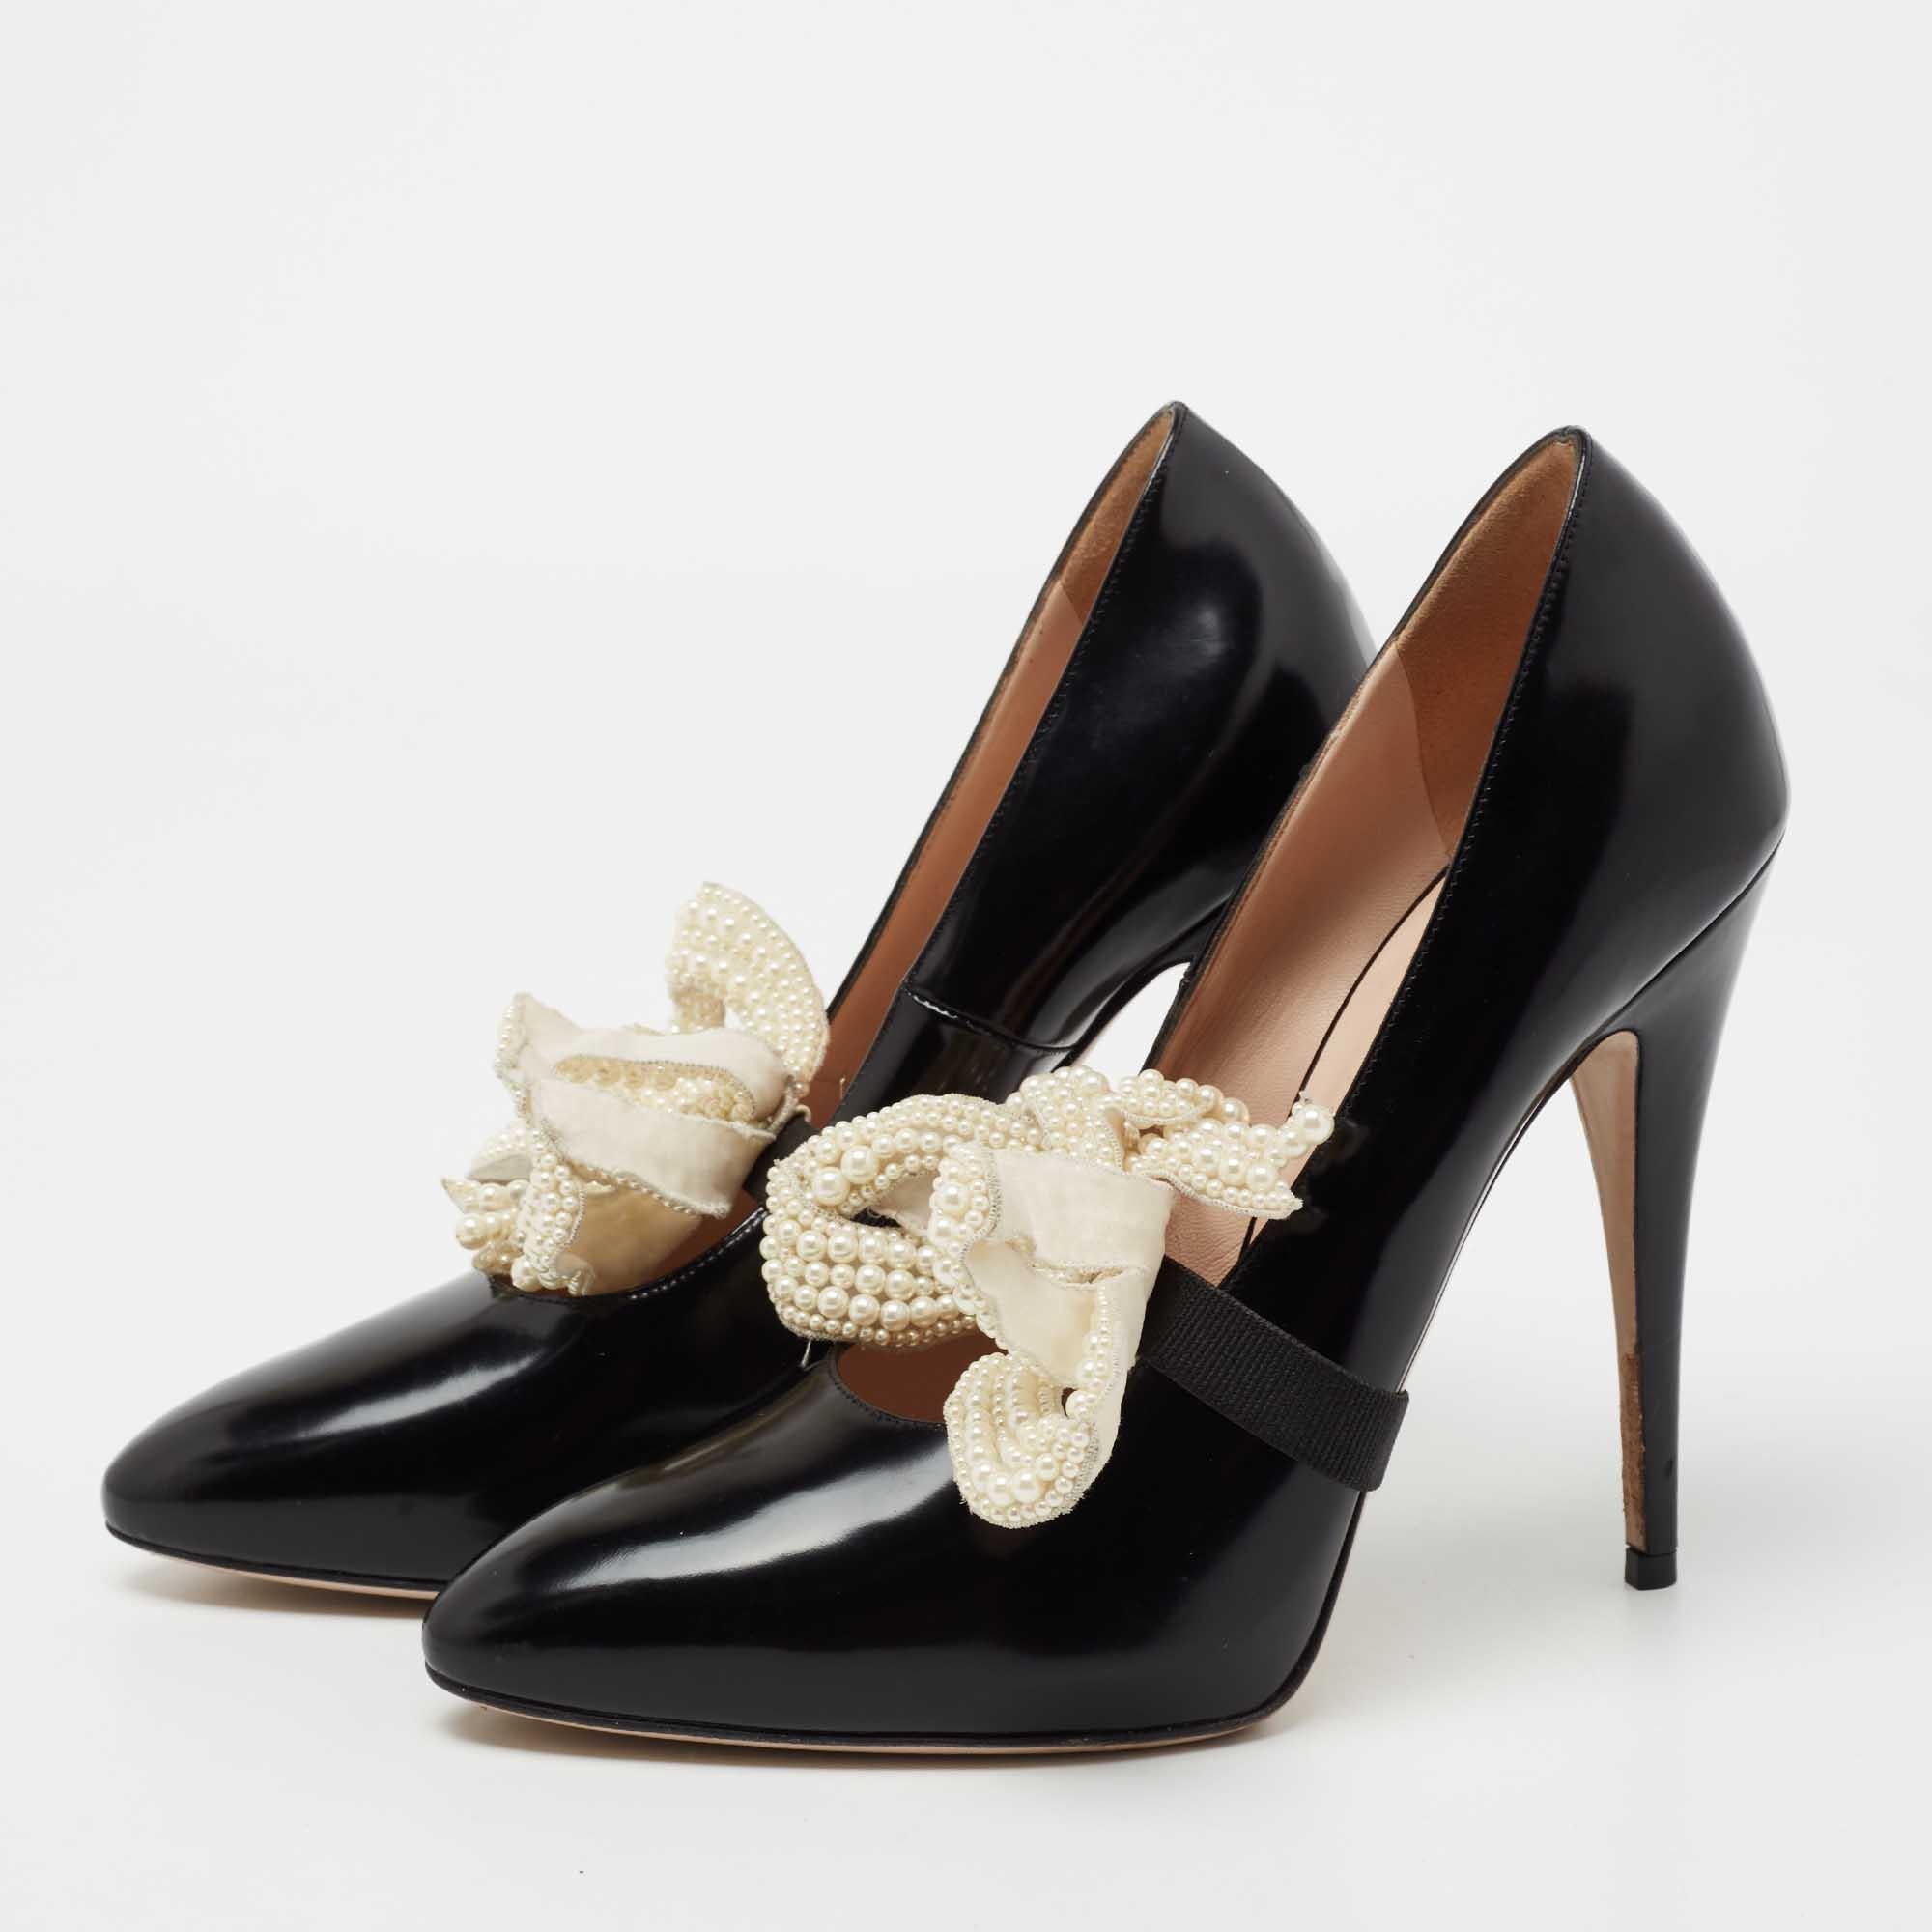 It's a simple pair of black pumps that Gucci elevates by adding a removable crystal-embellished bow detail. So, it's like two shoes for the price of one! The Elaisa pumps are made of patent leather and mounted on 13 cm heels. Dress them up or down,